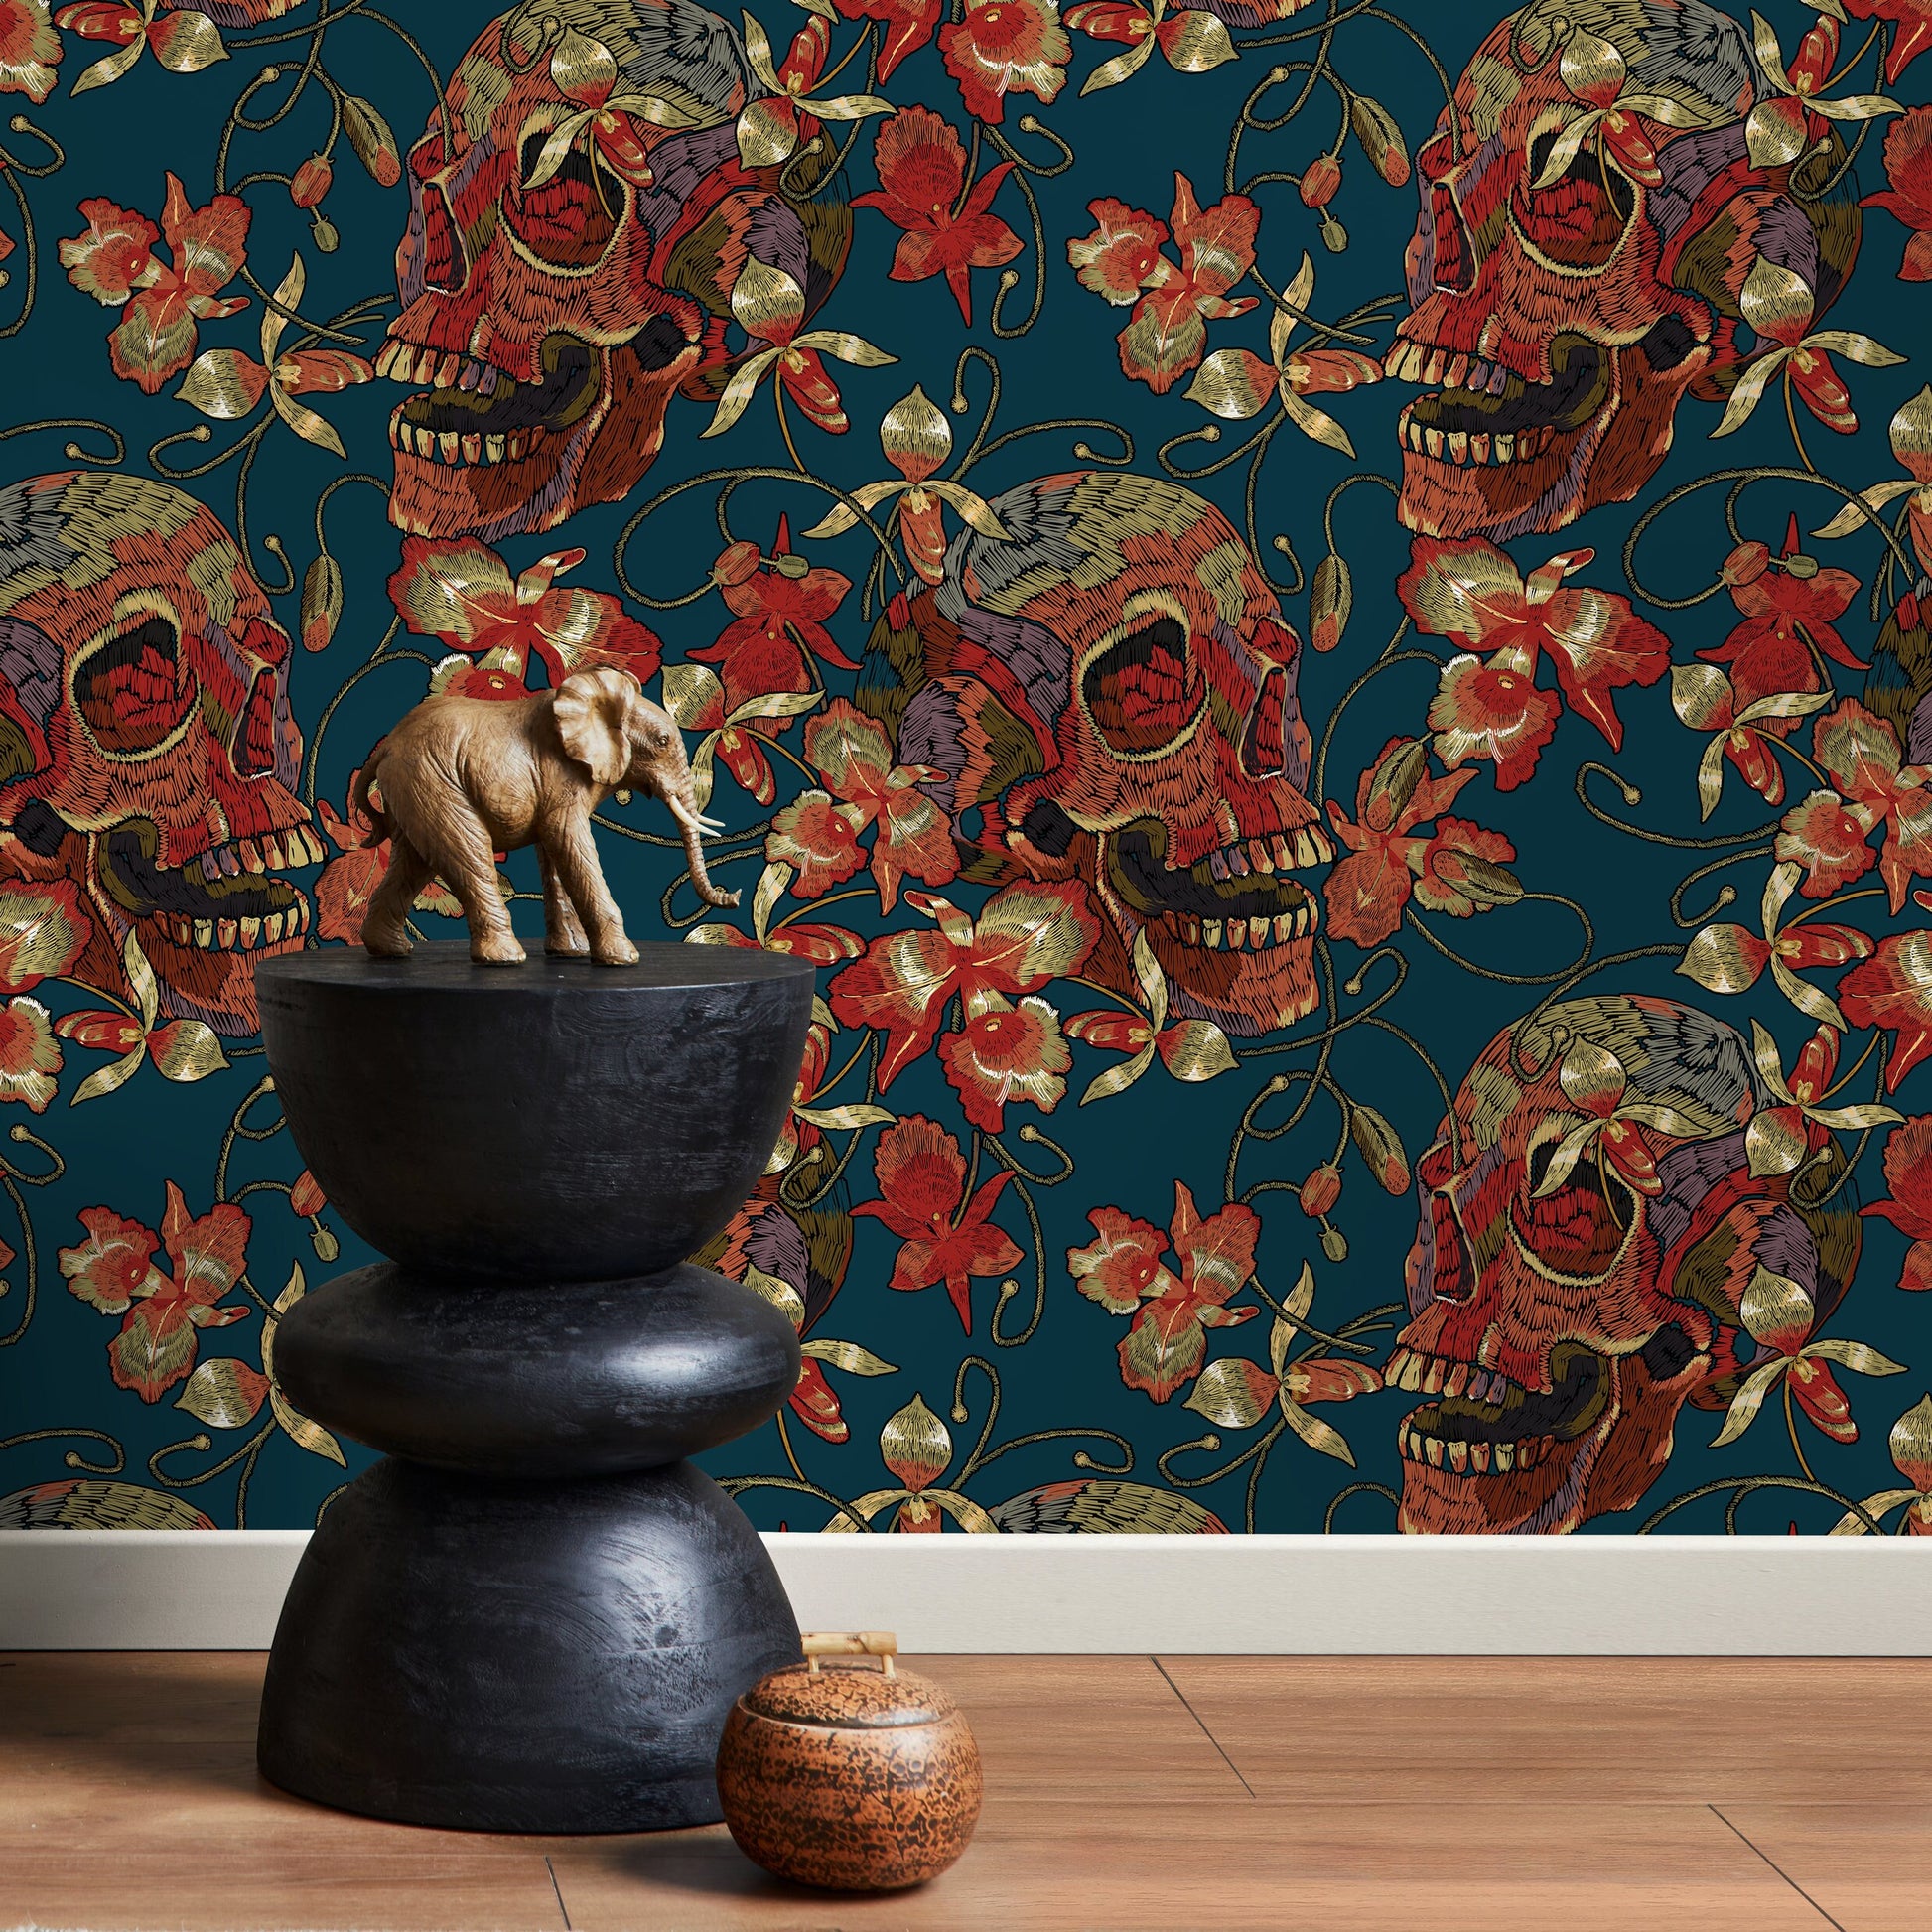 Gothic Skull Wallpaper Maximalist Wallpaper Peel and Stick and Traditional Wallpaper - D895